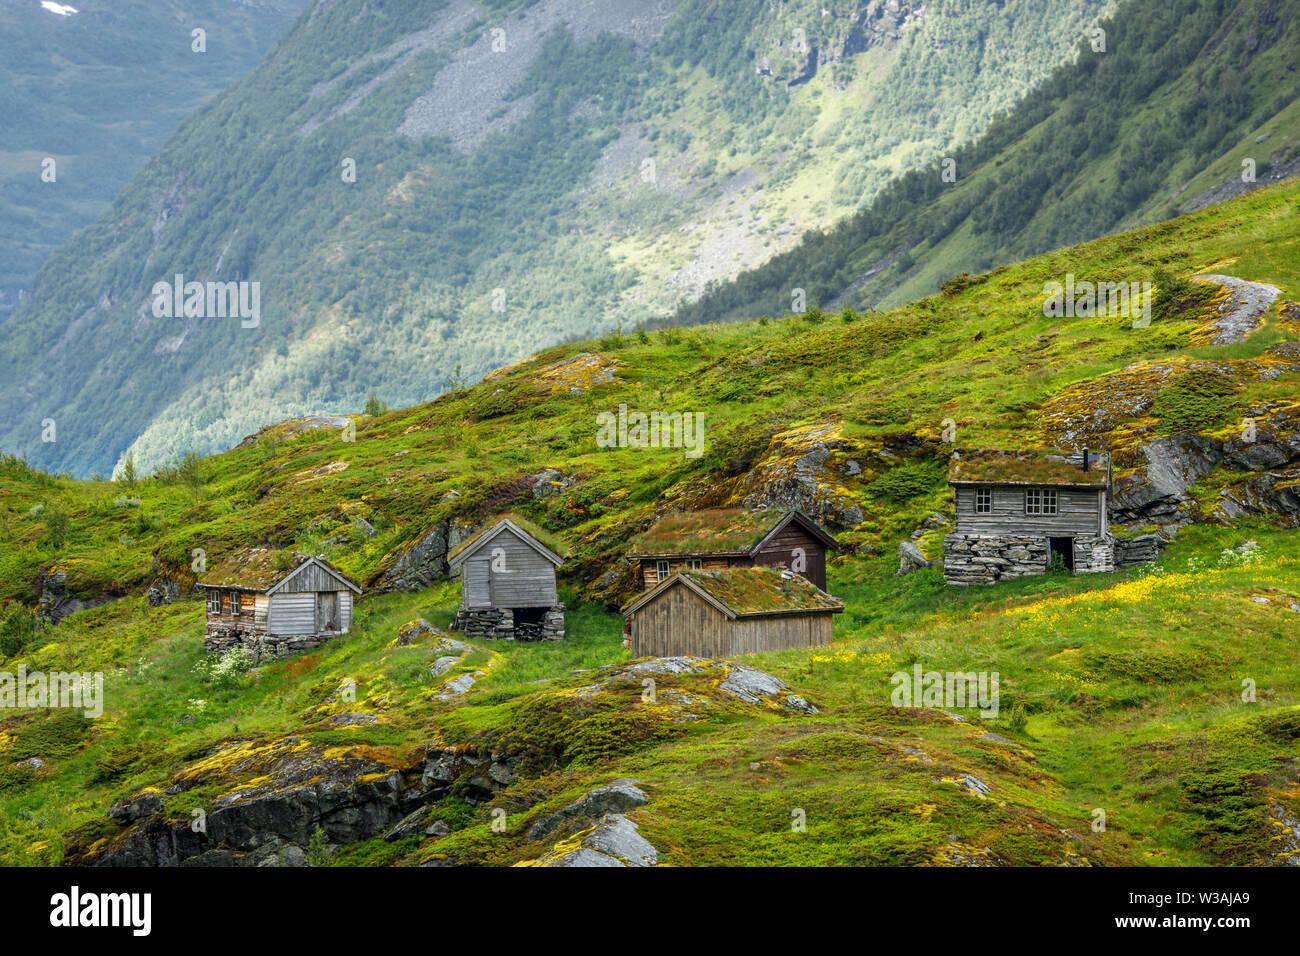 Norwegian mountain village with traditional turf roof houses, Geiranger, Sunnmore region, More og Romsdal county, Norway Stock Photo